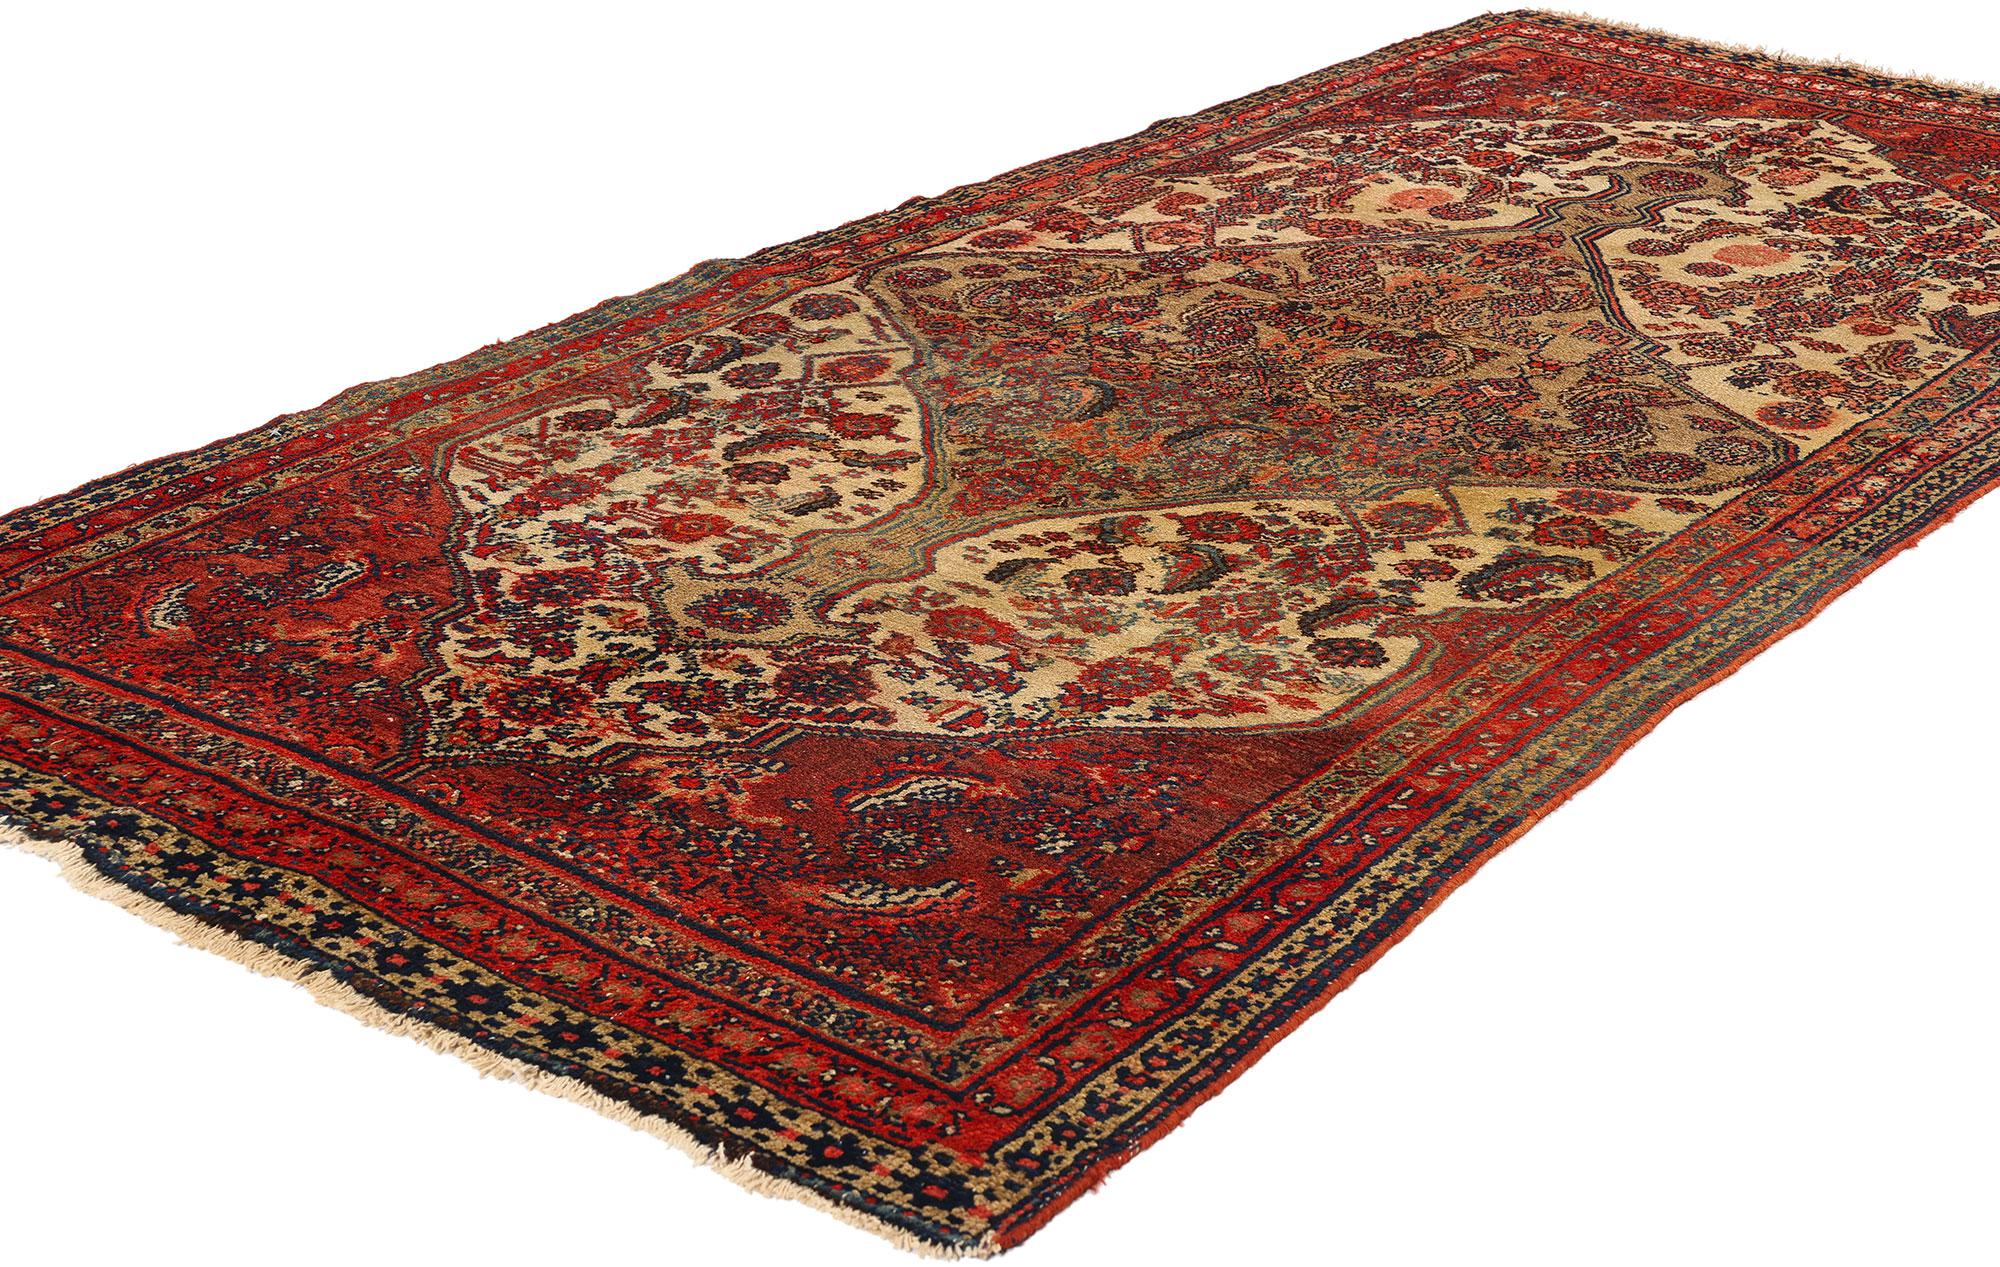 76958 Antique Persian Hamadan Rug Runner, 03'10 x 07'05. Persian Hamadan rugs with a Medallion and Corner Design are a type of handwoven rug originating from the Hamadan region in Iran. These rugs typically feature a central medallion motif